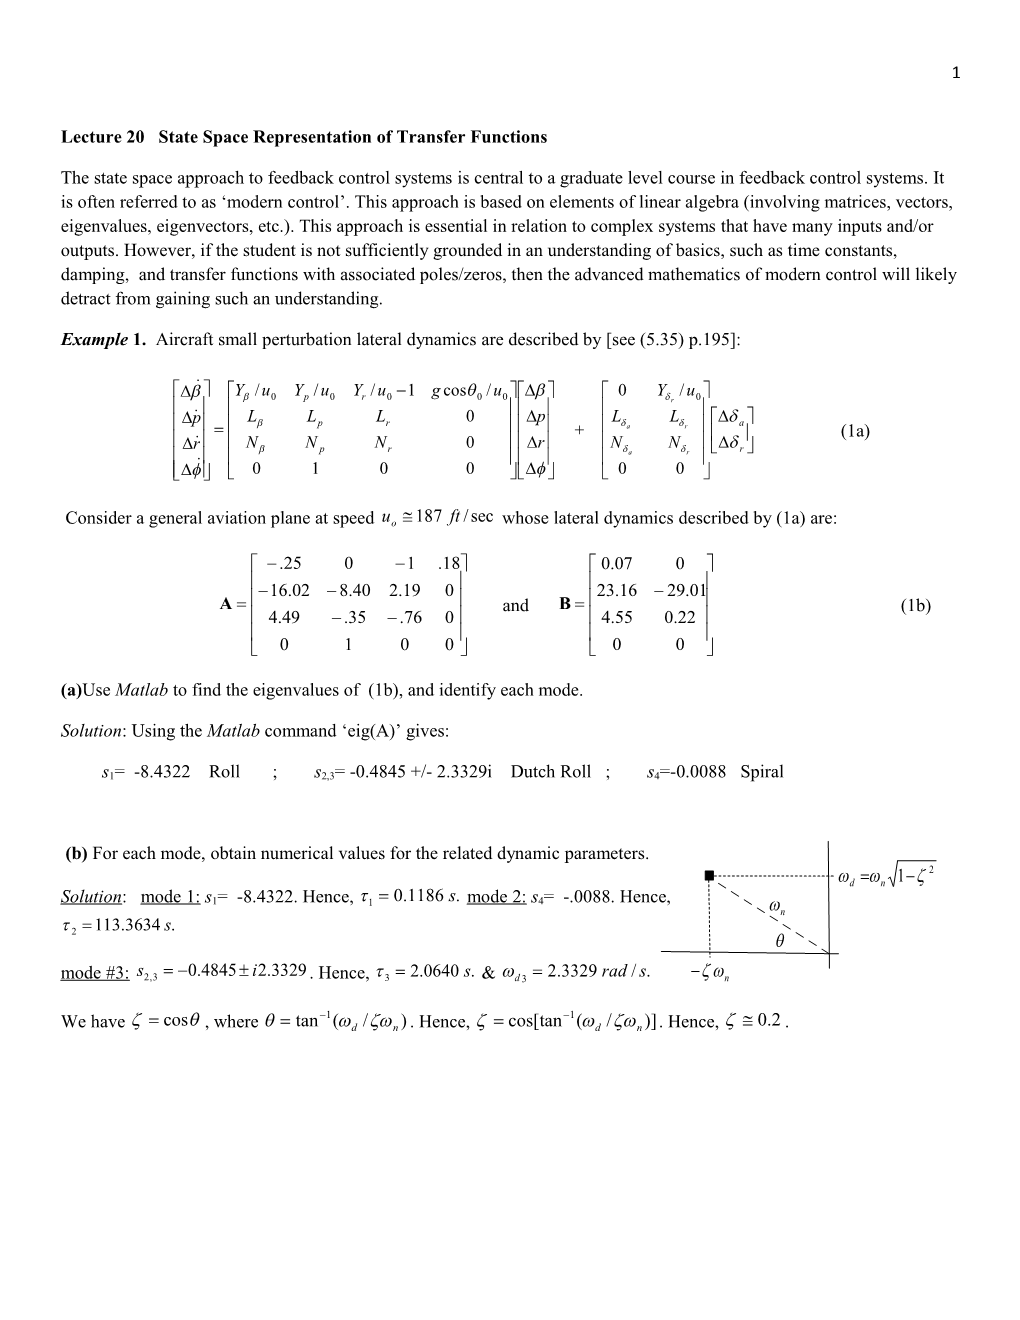 Lecture 20 State Space Representation of Transfer Functions